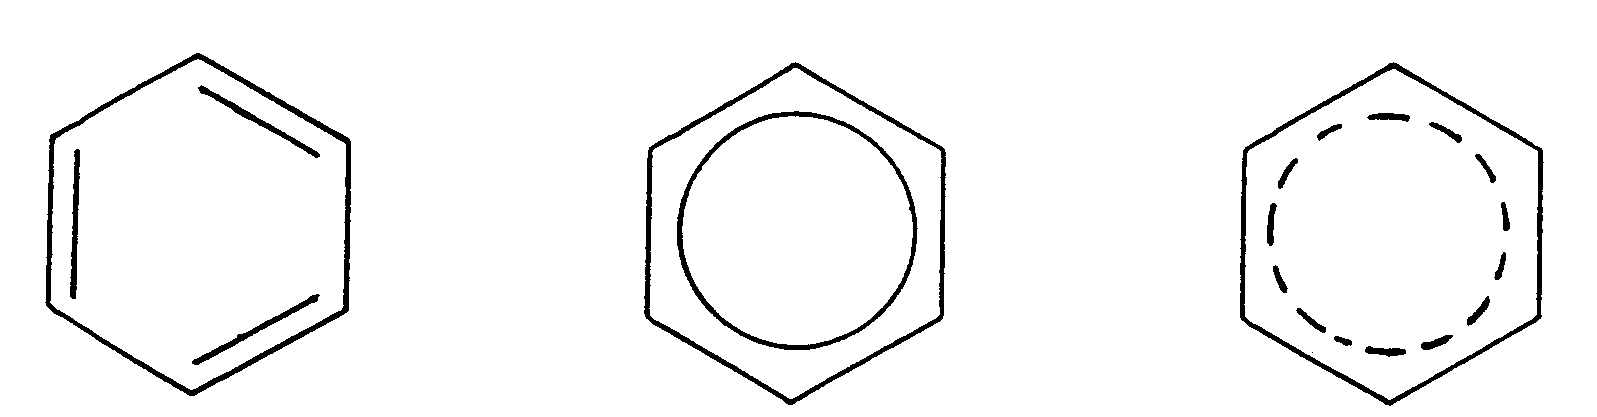 how-are-the-aromatic-rings-represented-why-socratic